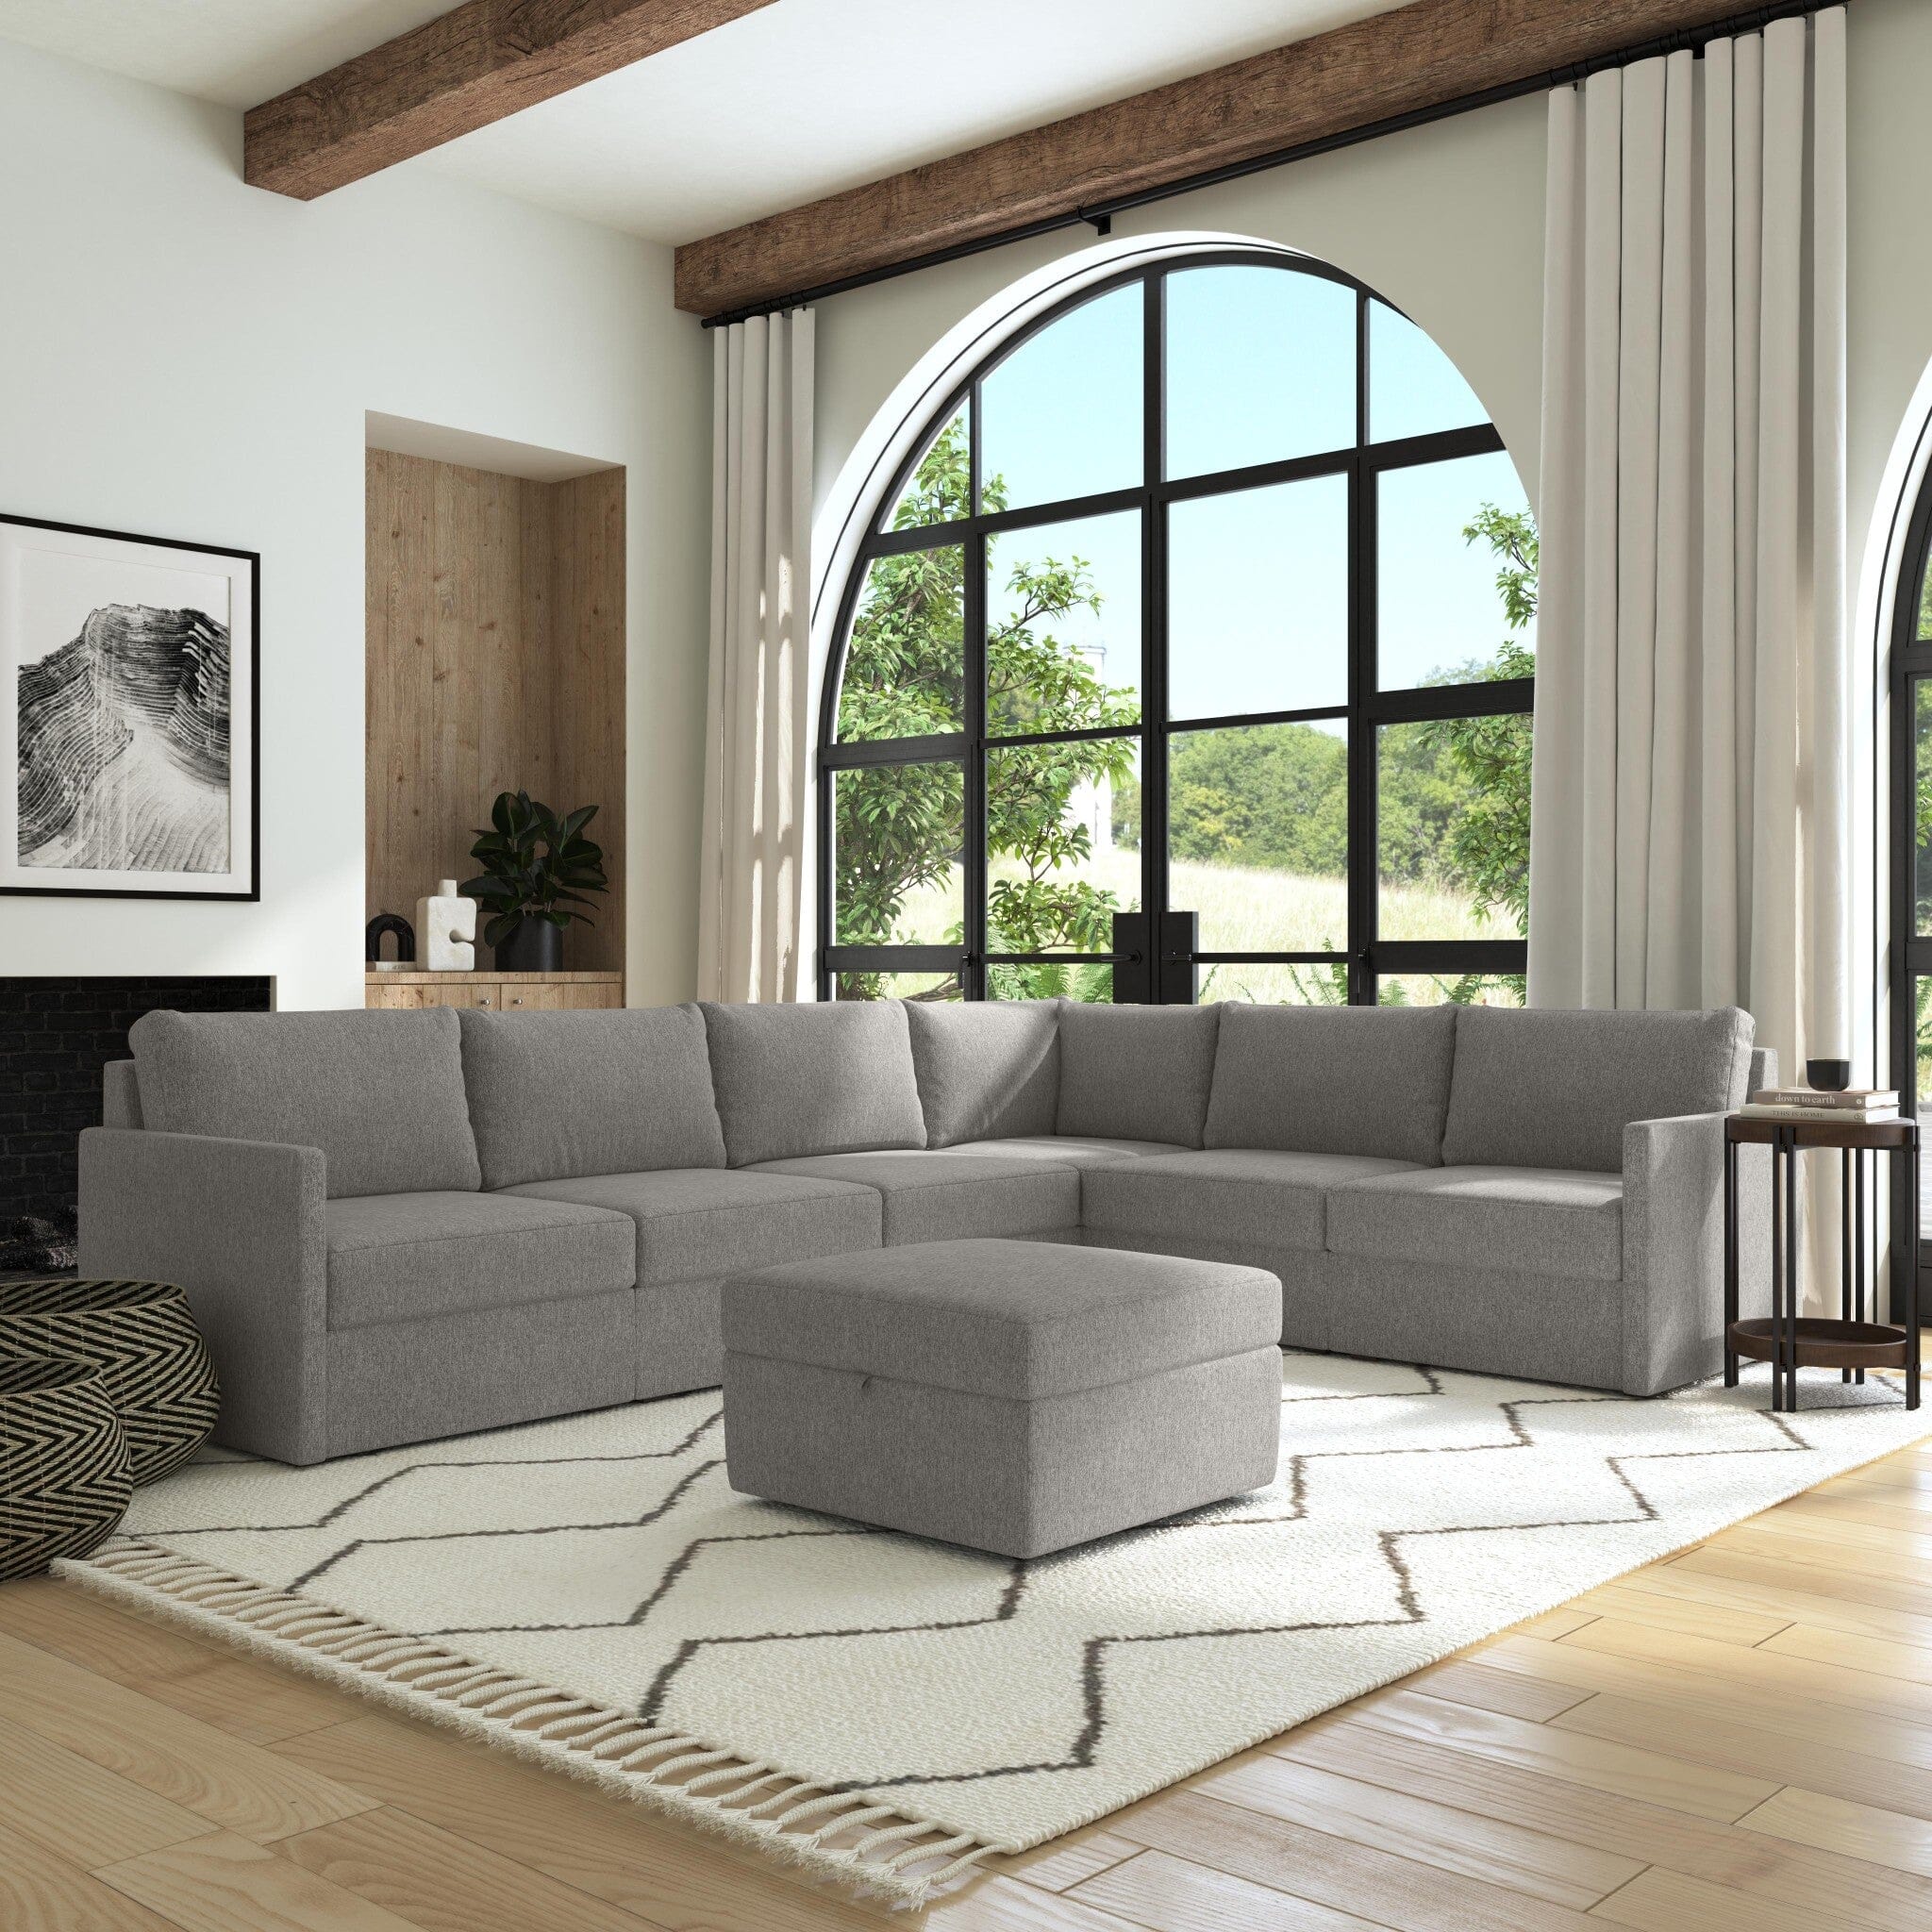 Traditional 6-Seat Sectional with Narrow Arm and Storage Ottoman By Flex Sectional Flex